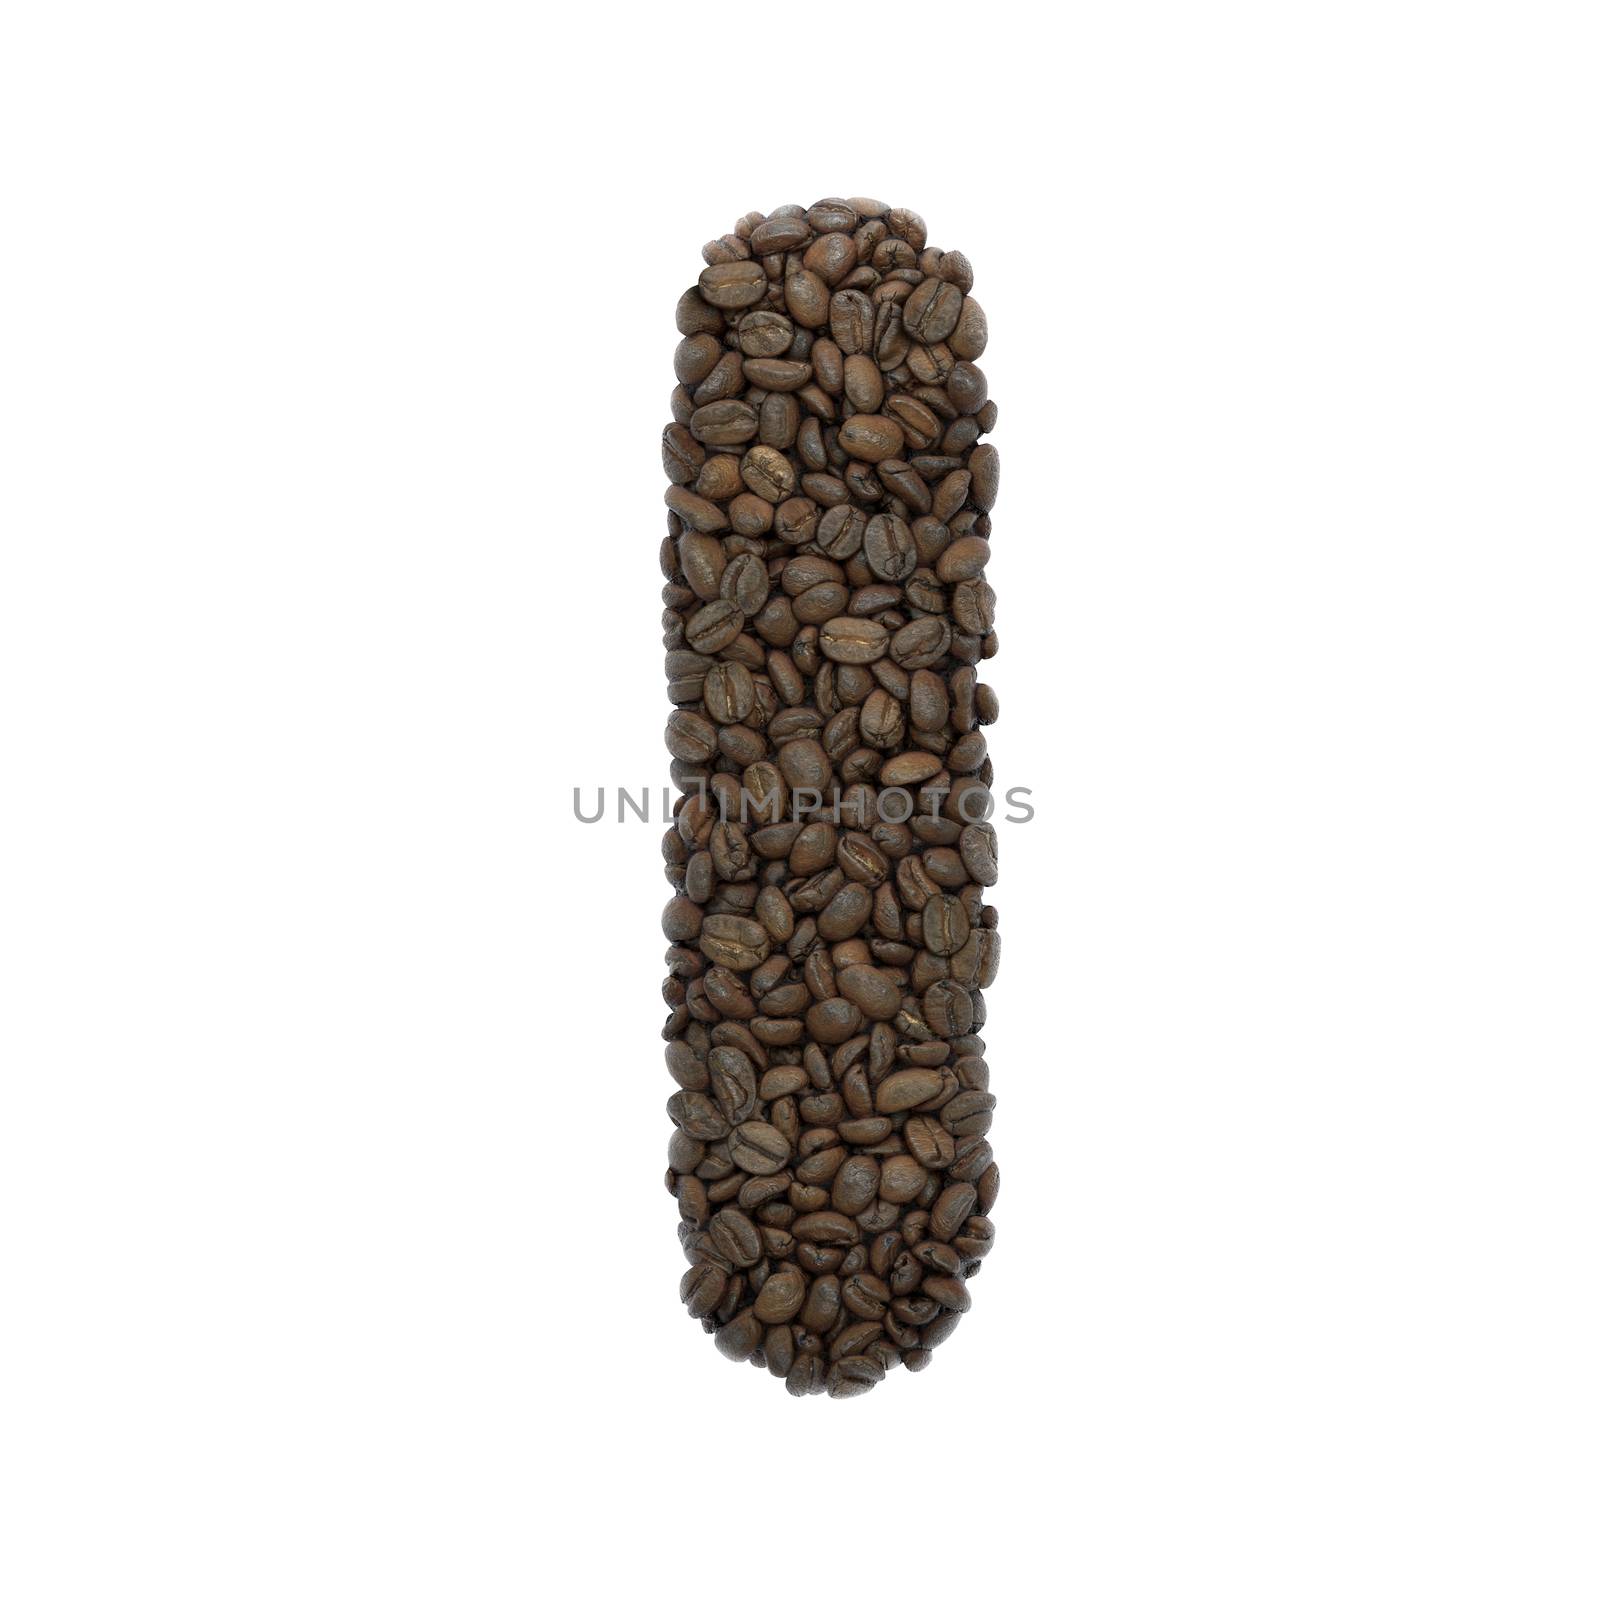 Coffee letter I - Uppercase 3d roasted beans font isolated on white background. This alphabet is perfect for creative illustrations related but not limited to Coffee, energy, insomnia...